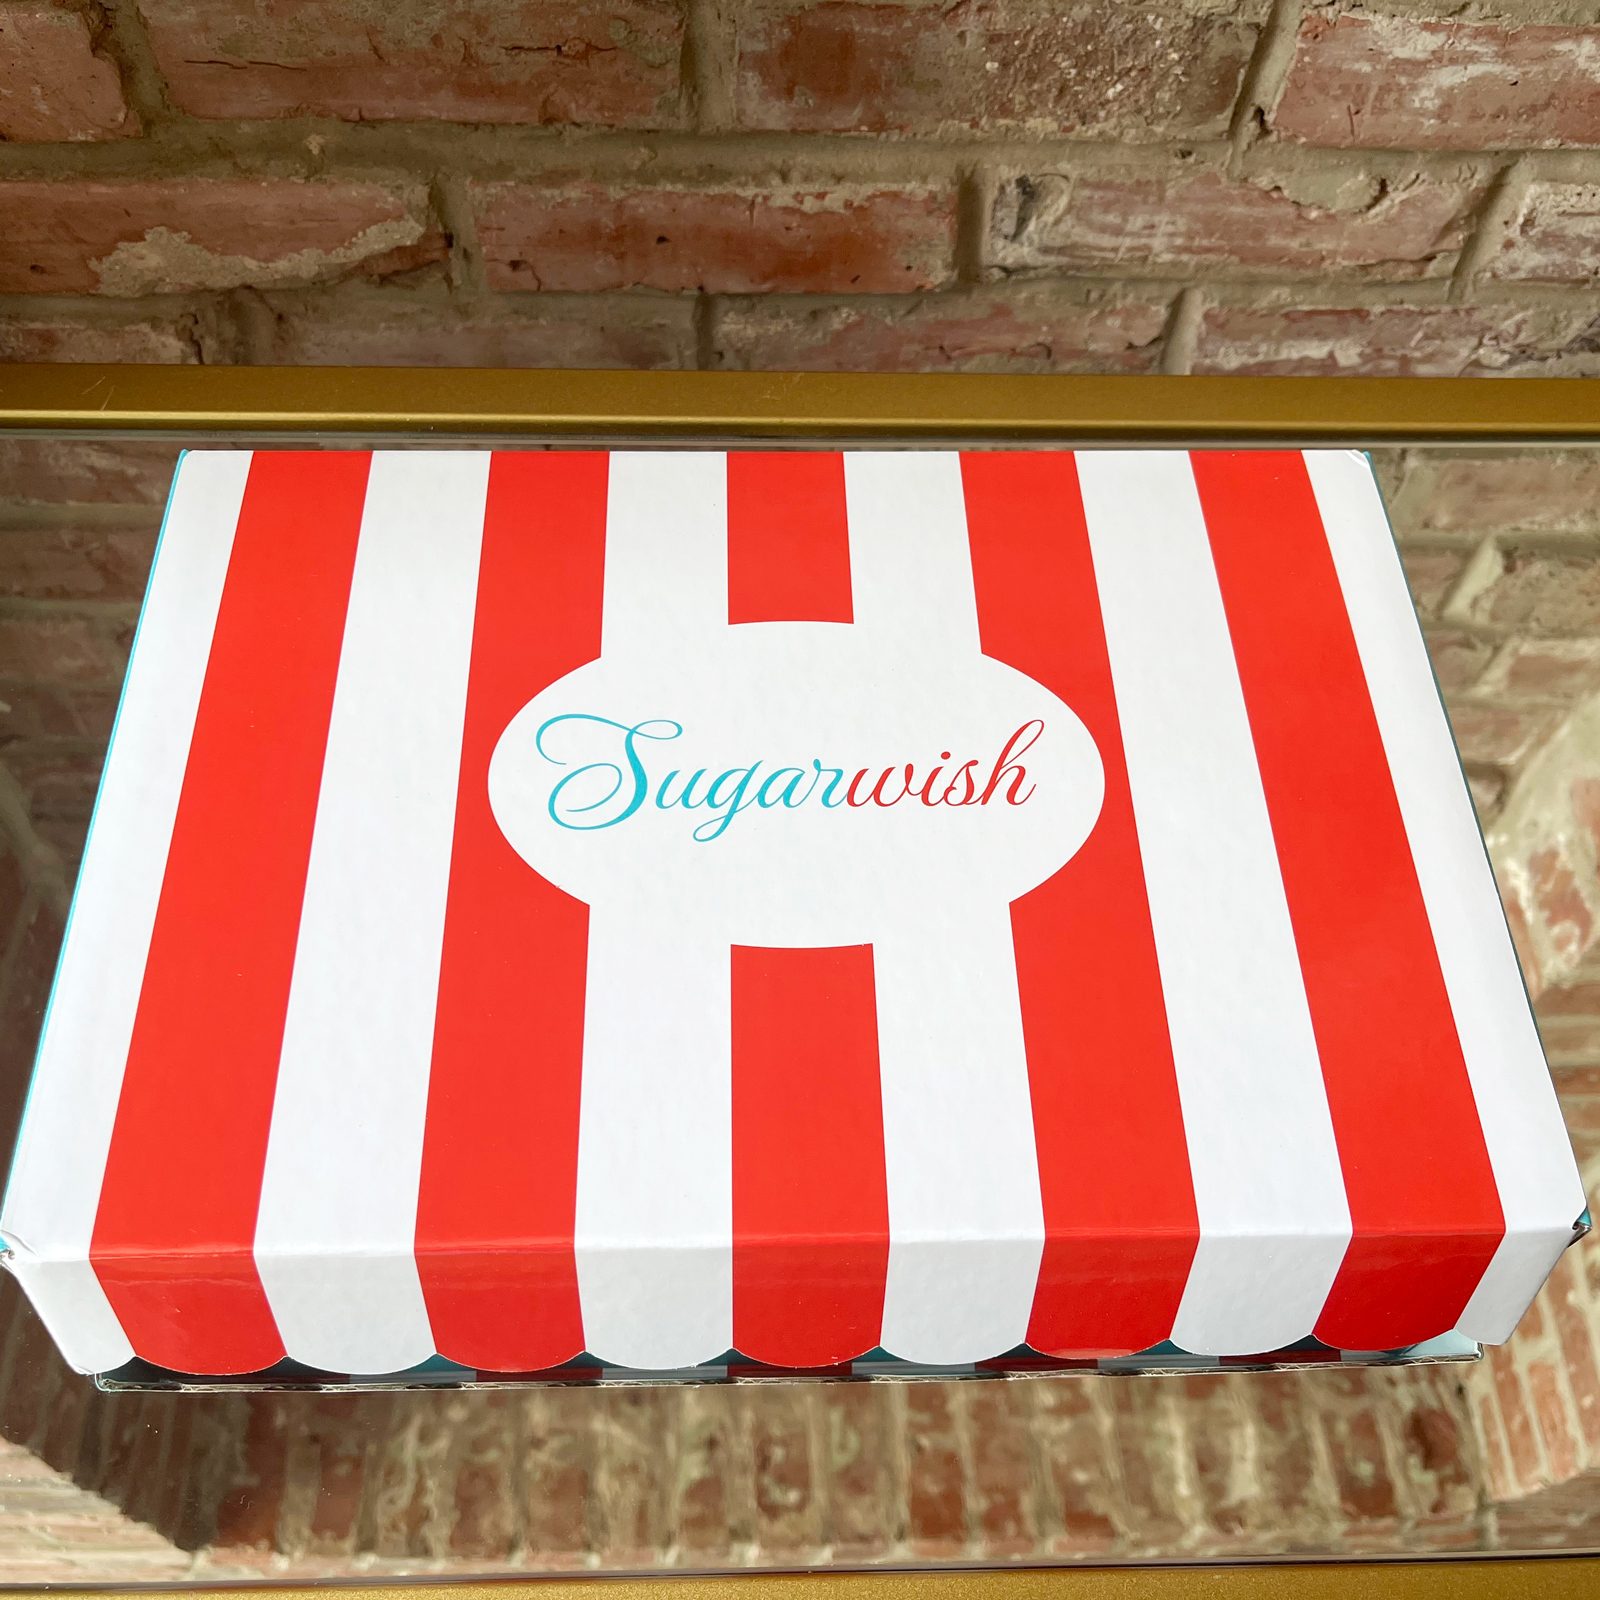 Sugarwish Our Candles gift sizes